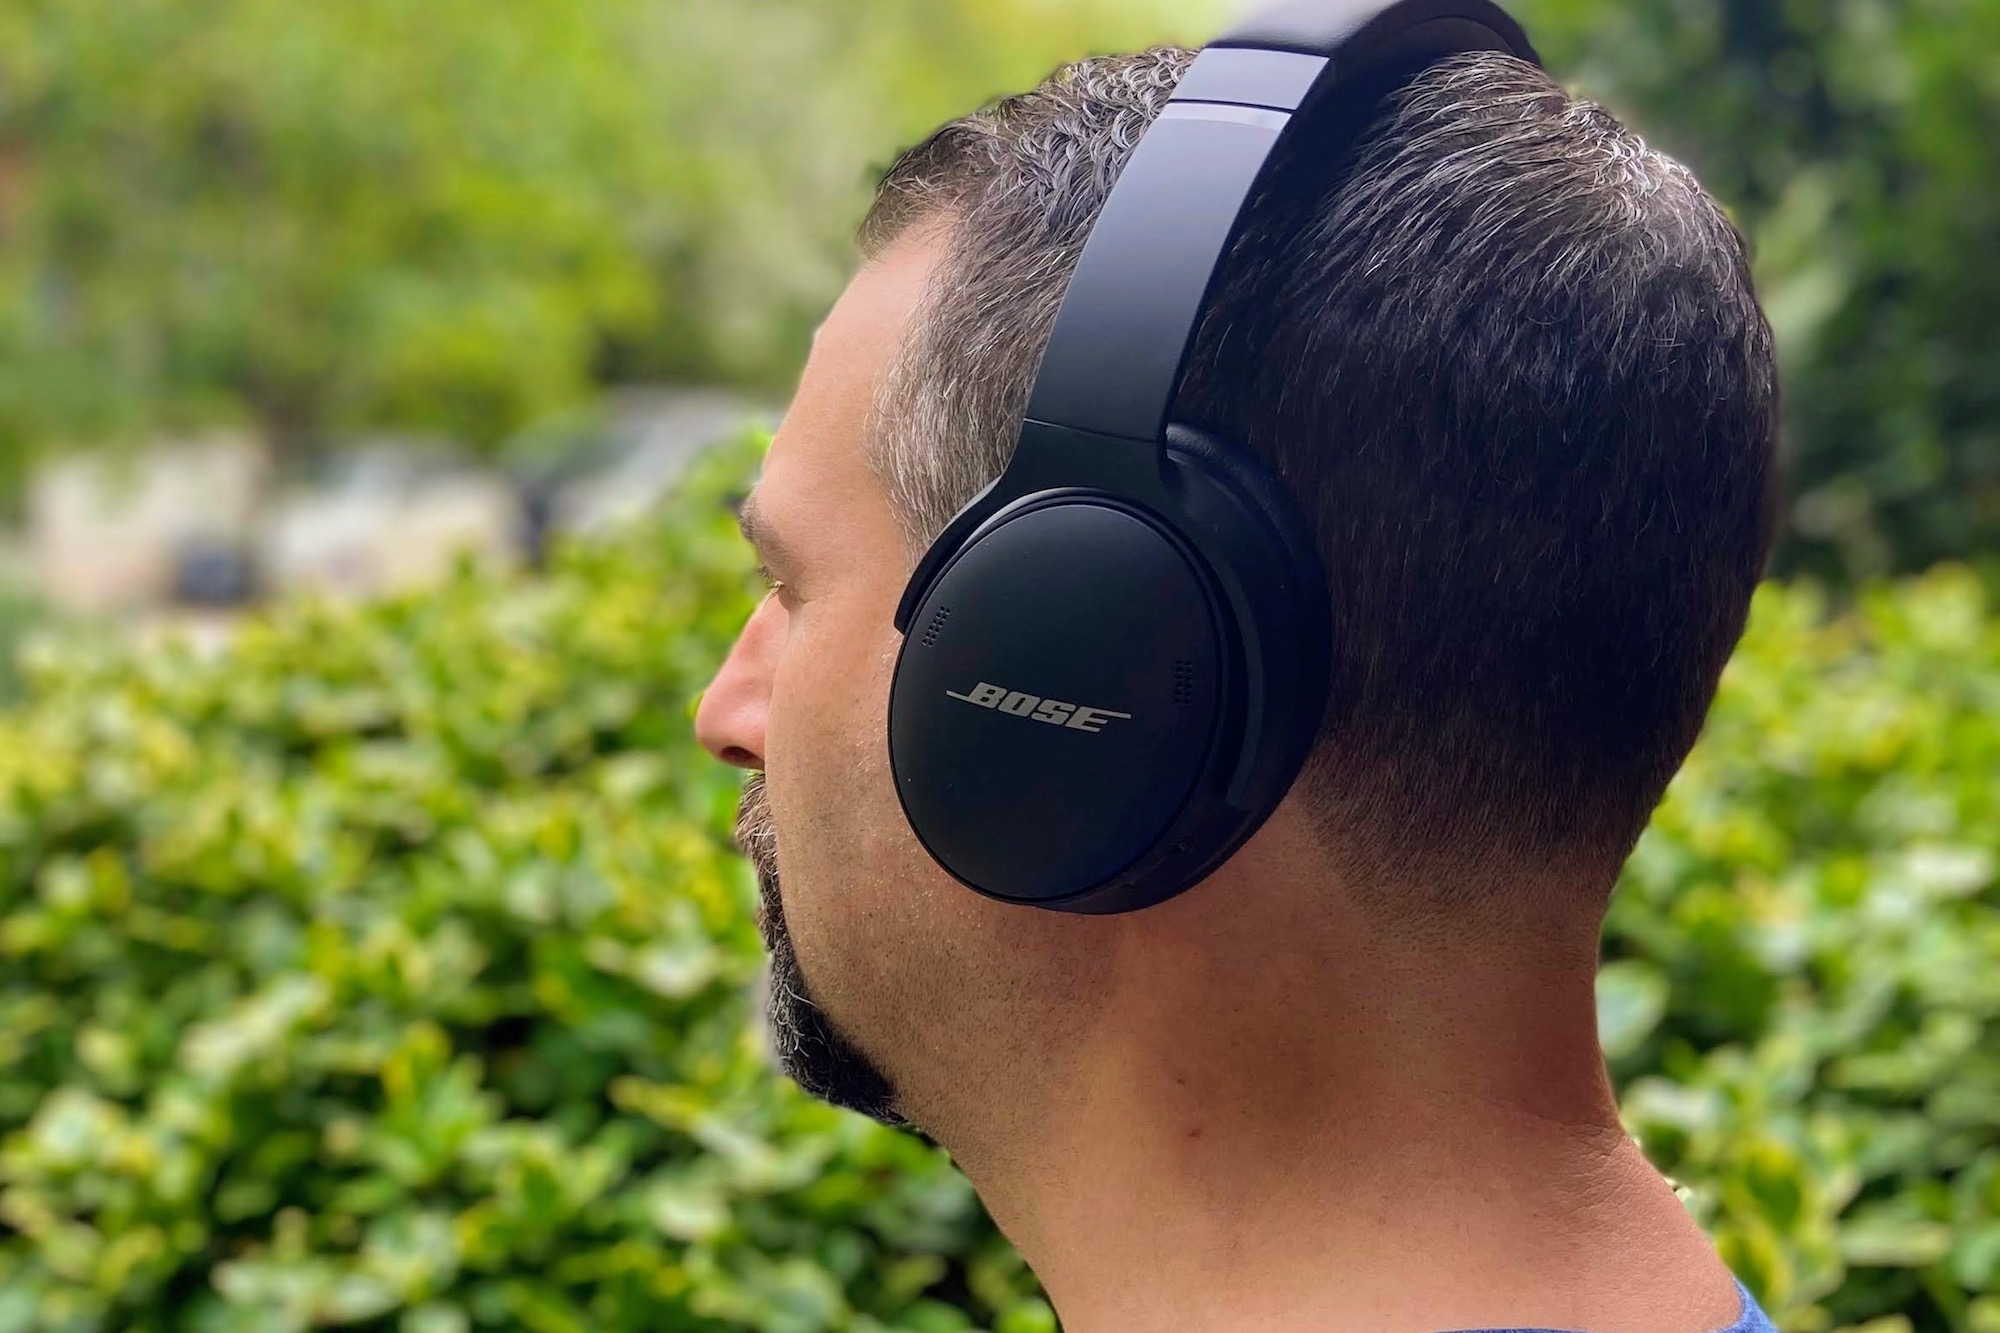 Bose QuietComfort 35 II Review: Google Assistant is a game changer for my  favorite headphones ever